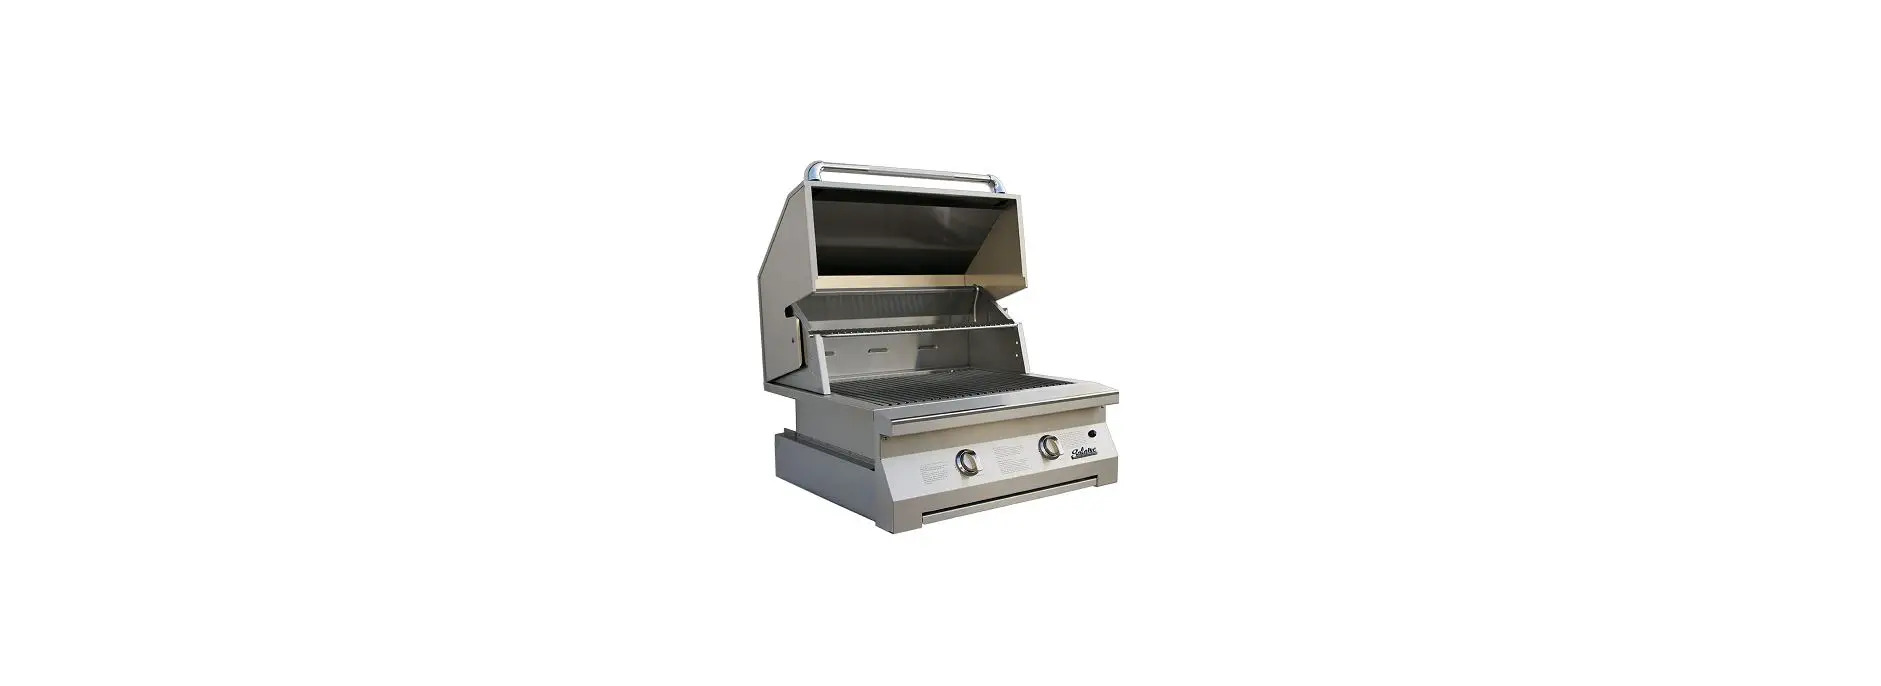 SRGG21708 Outdoor Portable Infrared Propane Gas Grill